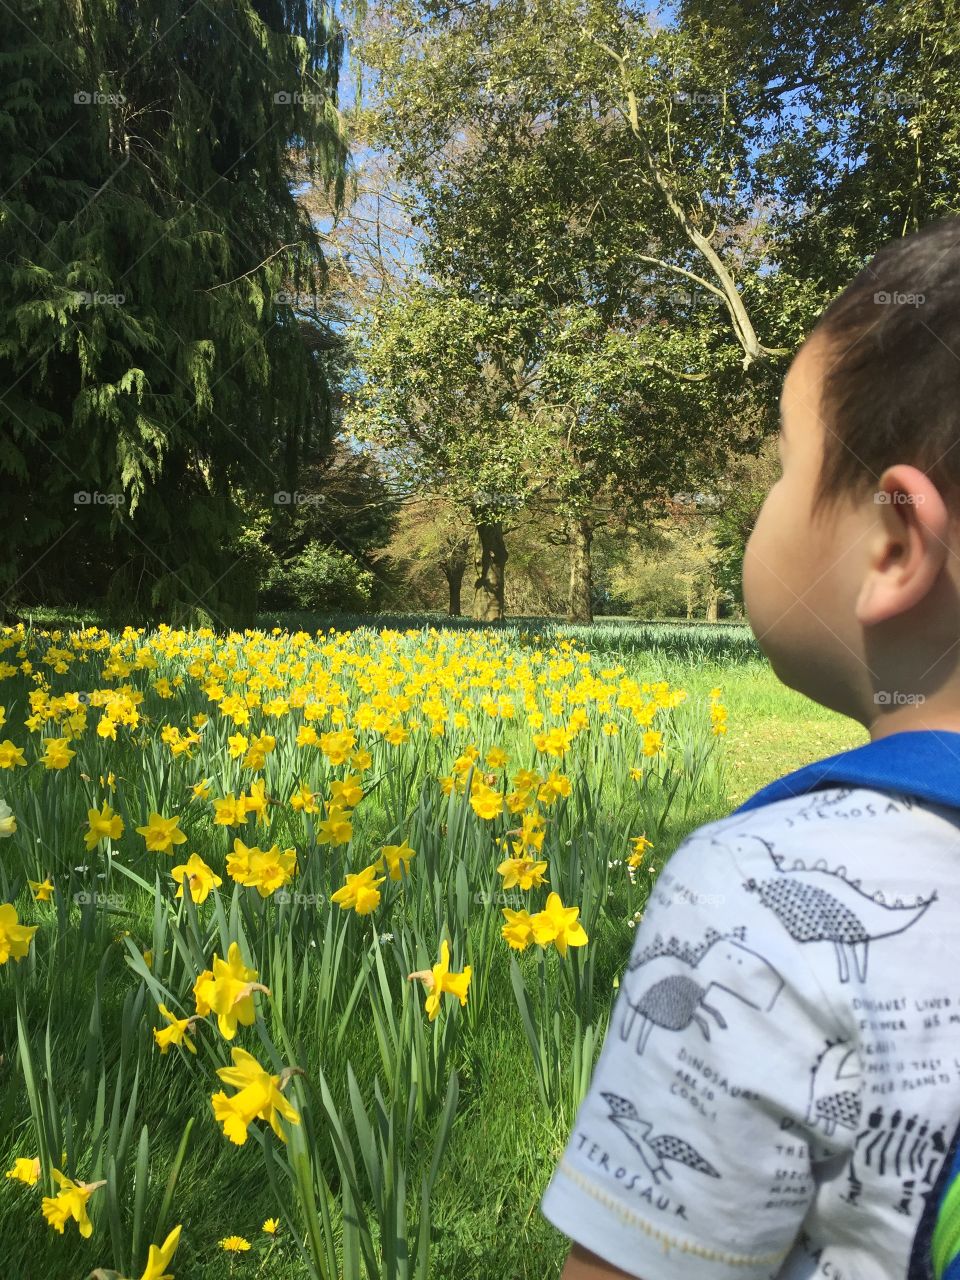 Little man appreciating the beautiful and colourful nature.  Lovely scenery.  Amazing.  